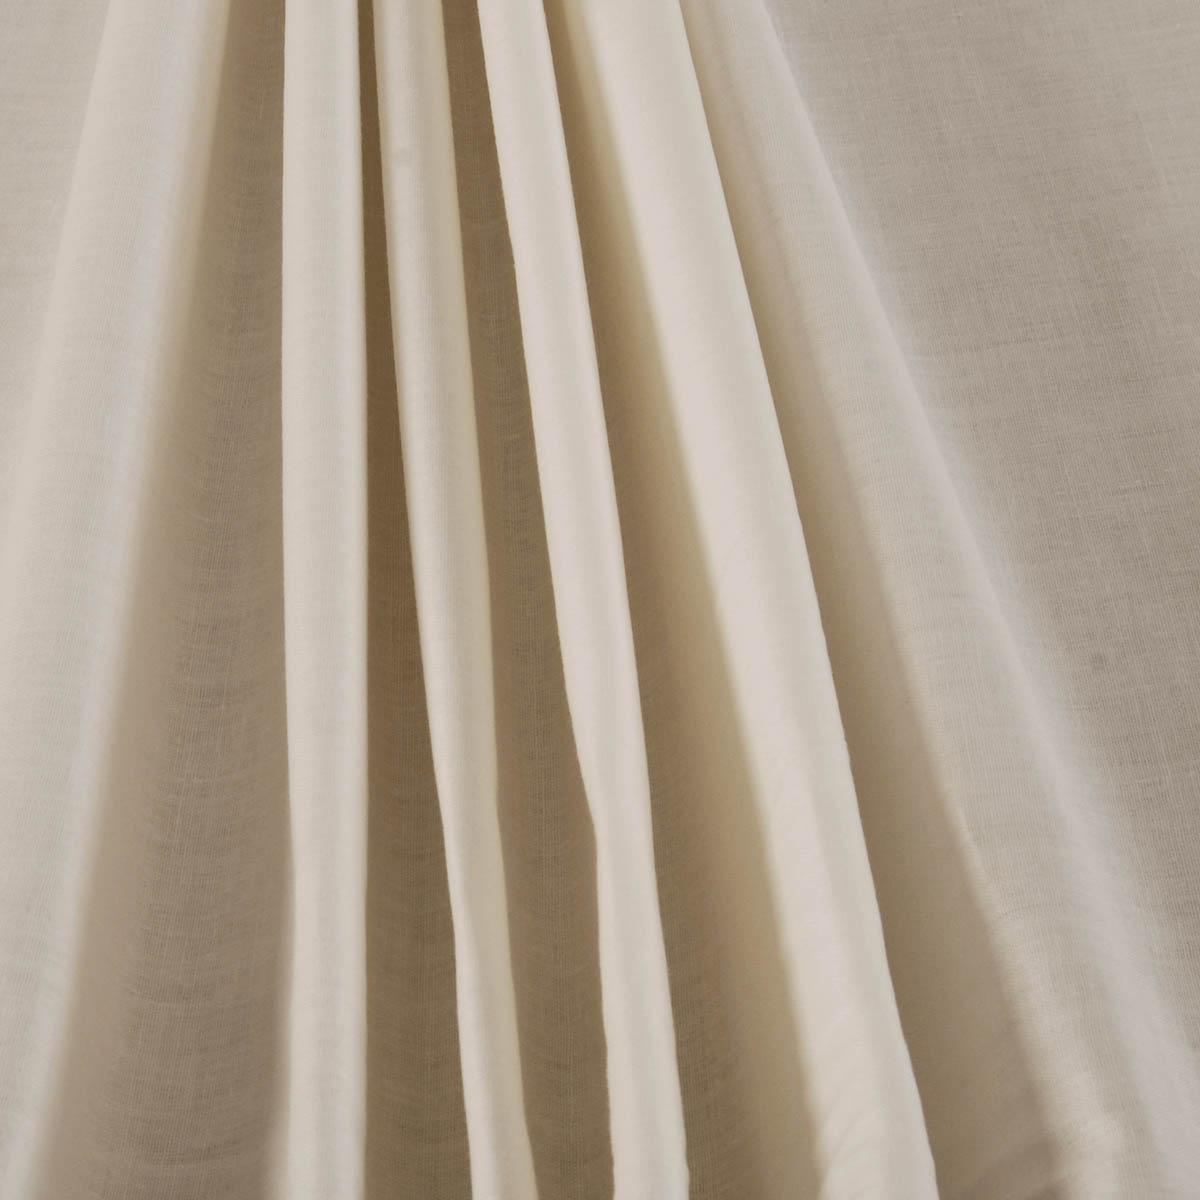 Curtain Lining Fabric | Great Quality Polycotton | Fabric Land